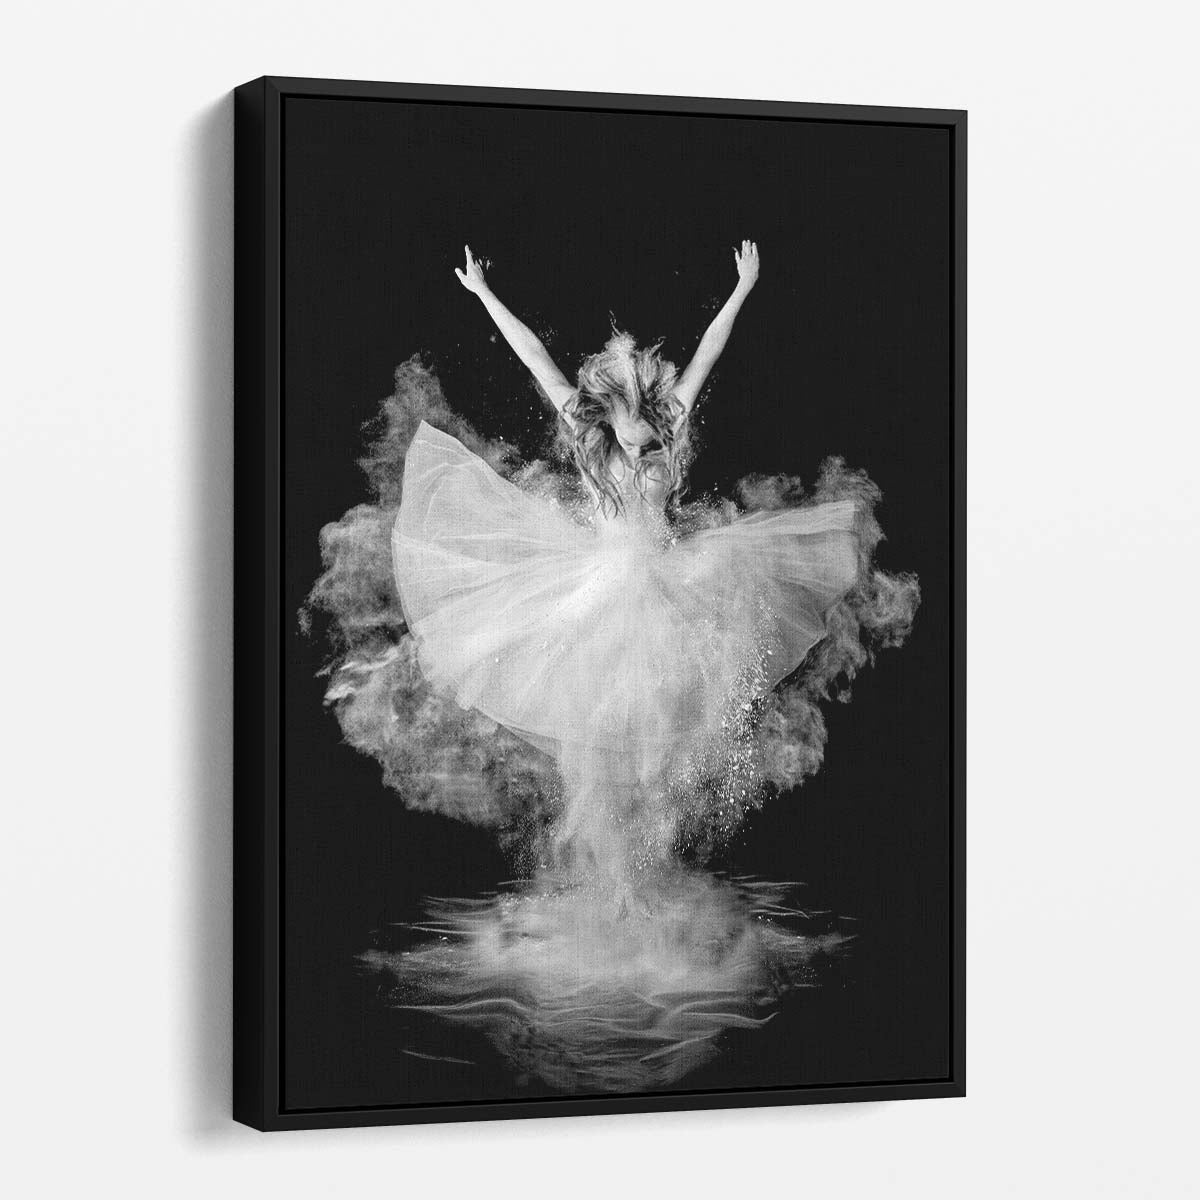 Angelic Ballerina Dance Explosion Monochrome Photography Wall Art by Luxuriance Designs, made in USA